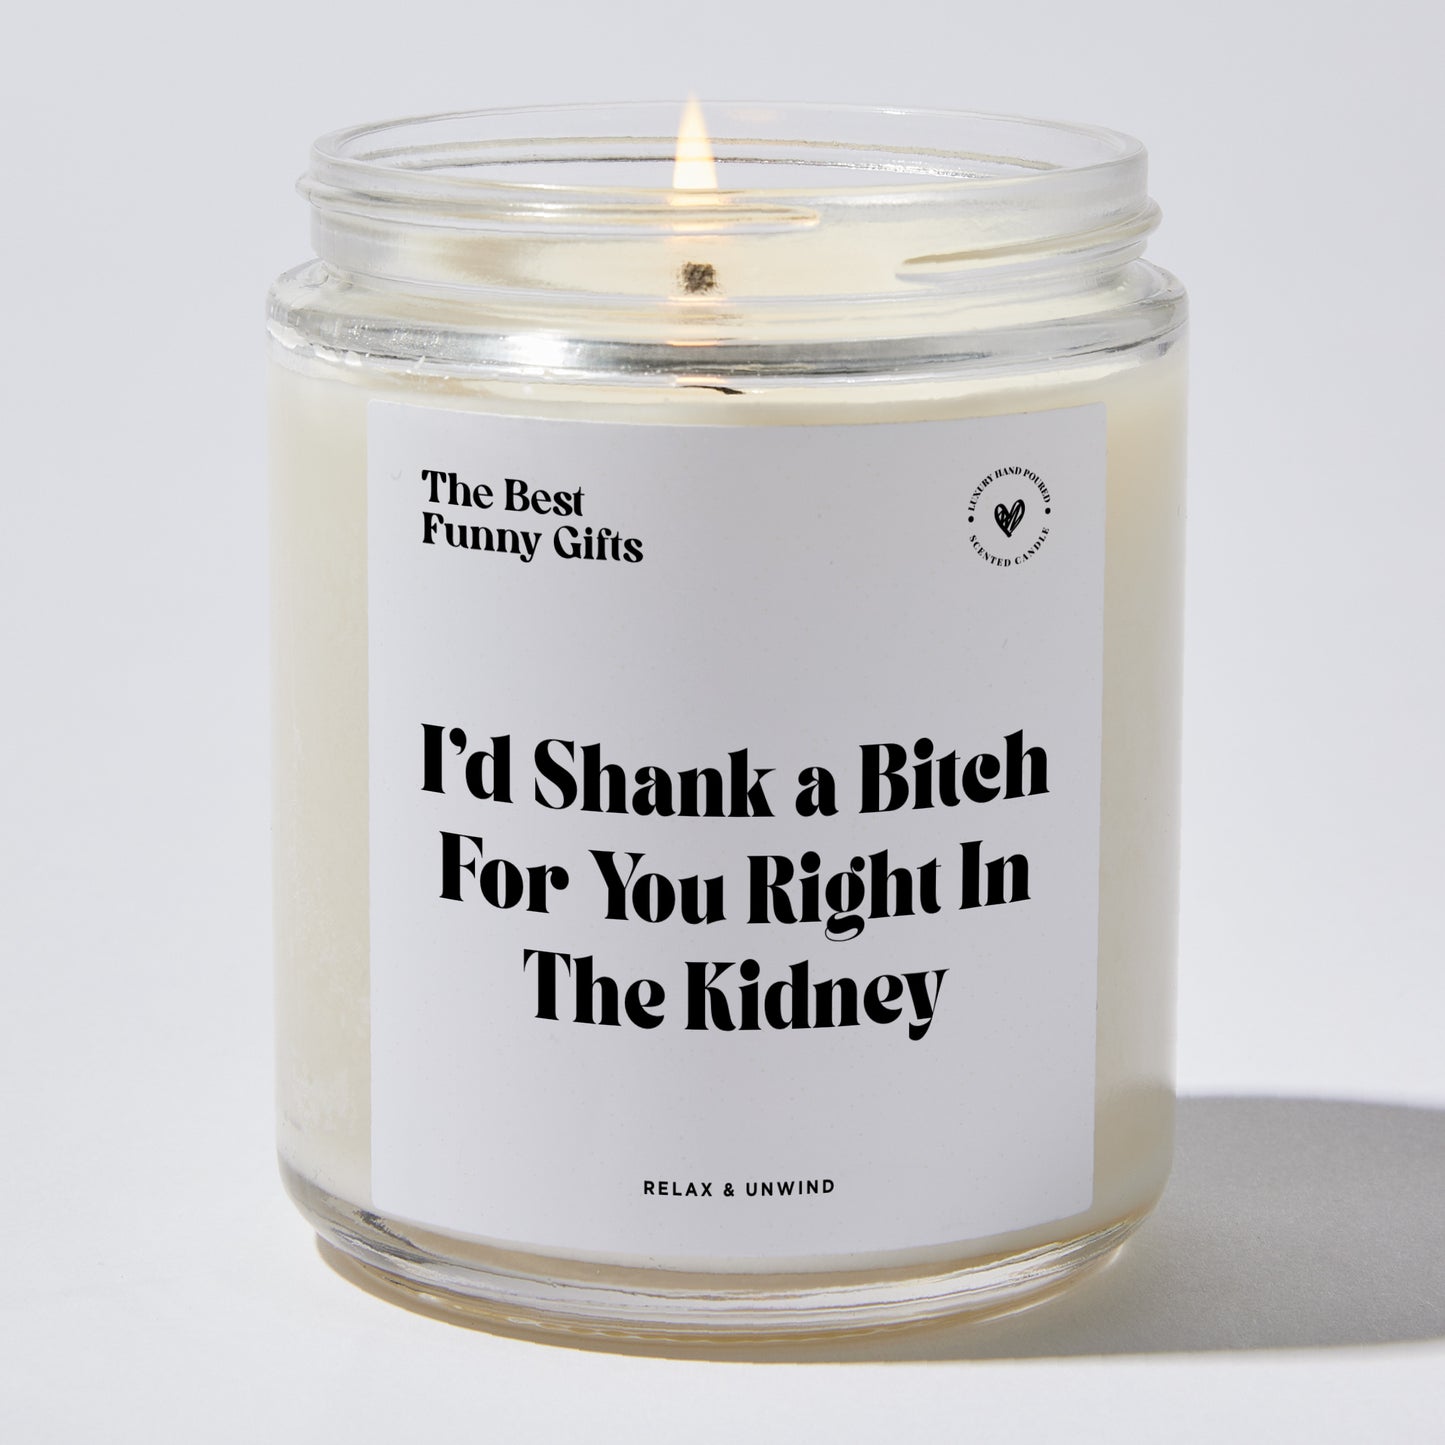 Best Friend Gift - I'd Shank A Bitch For You Right In The Kidney - Candle